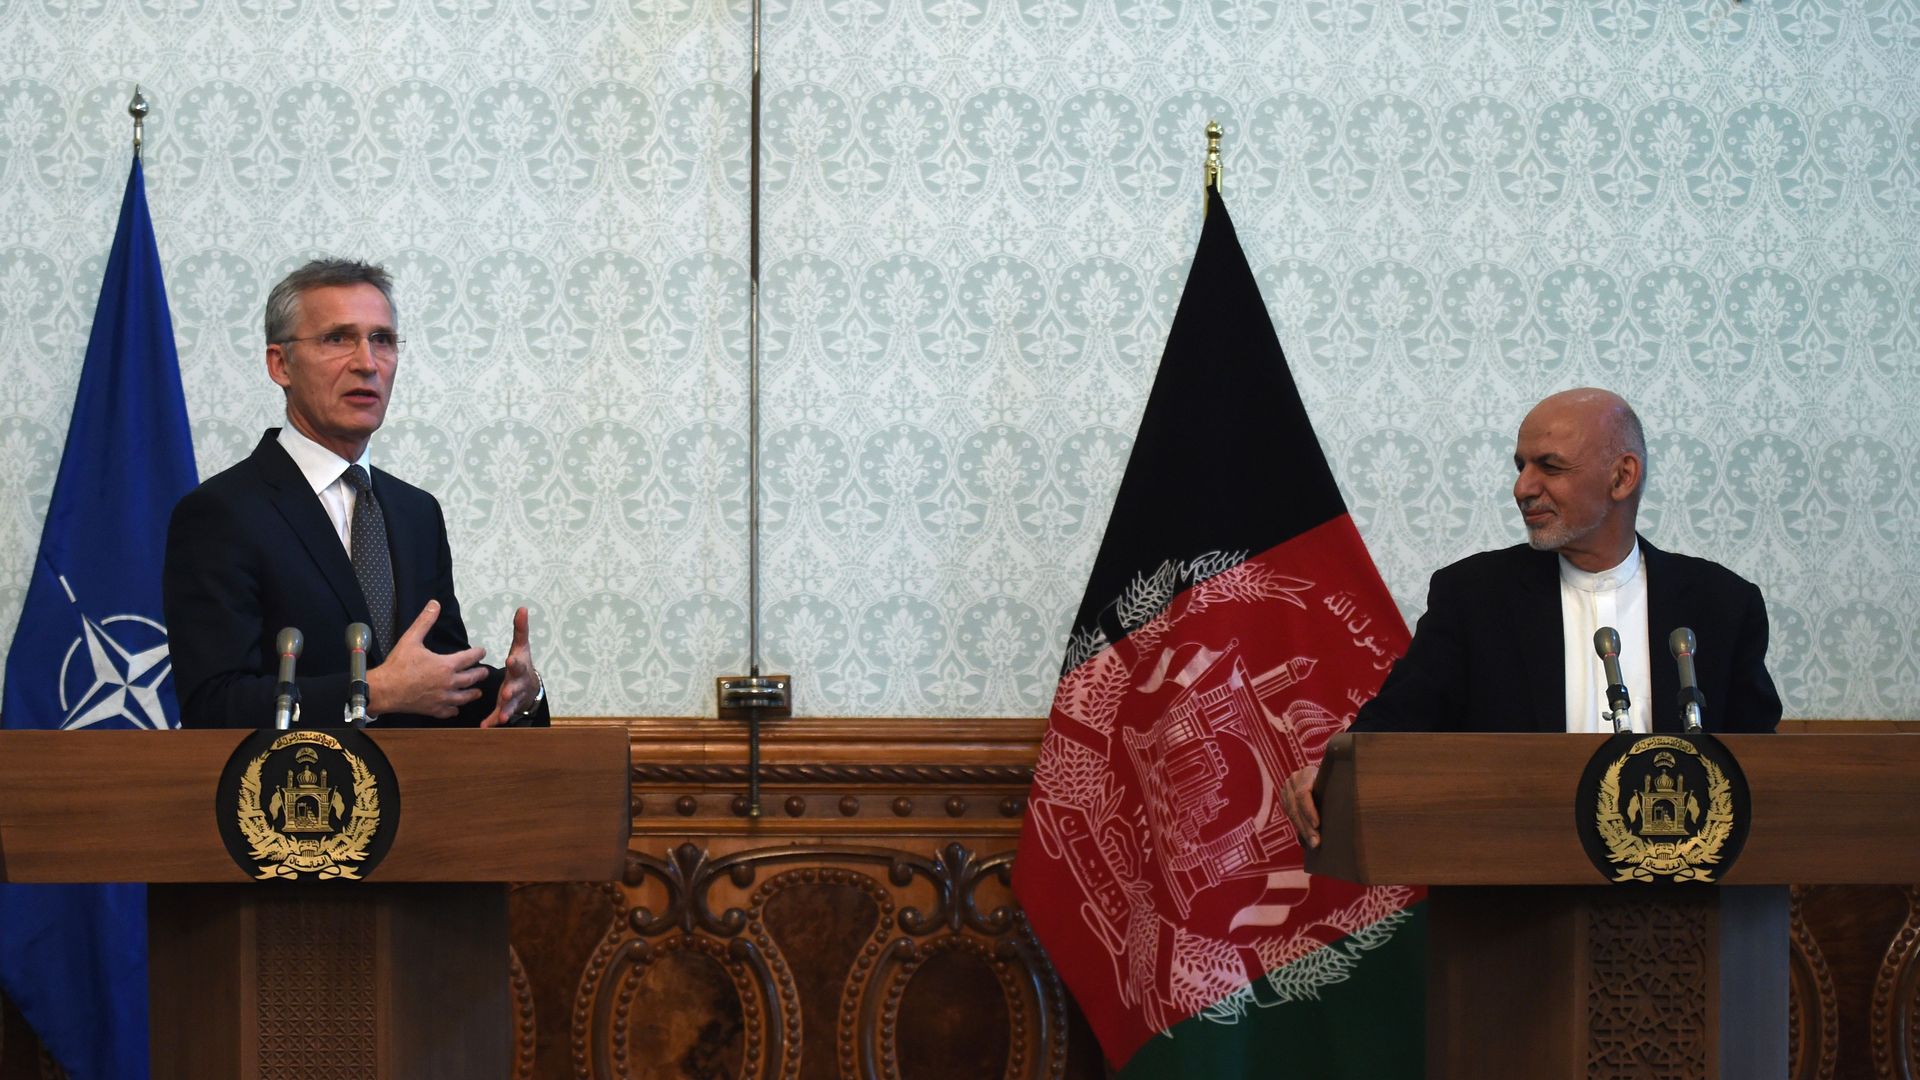 Secretary General of North Atlantic Treaty Organization (NATO) Jens Stoltenberg (L) gestures as speaks during a joint press conference with Afghan President Ashraf Ghani 